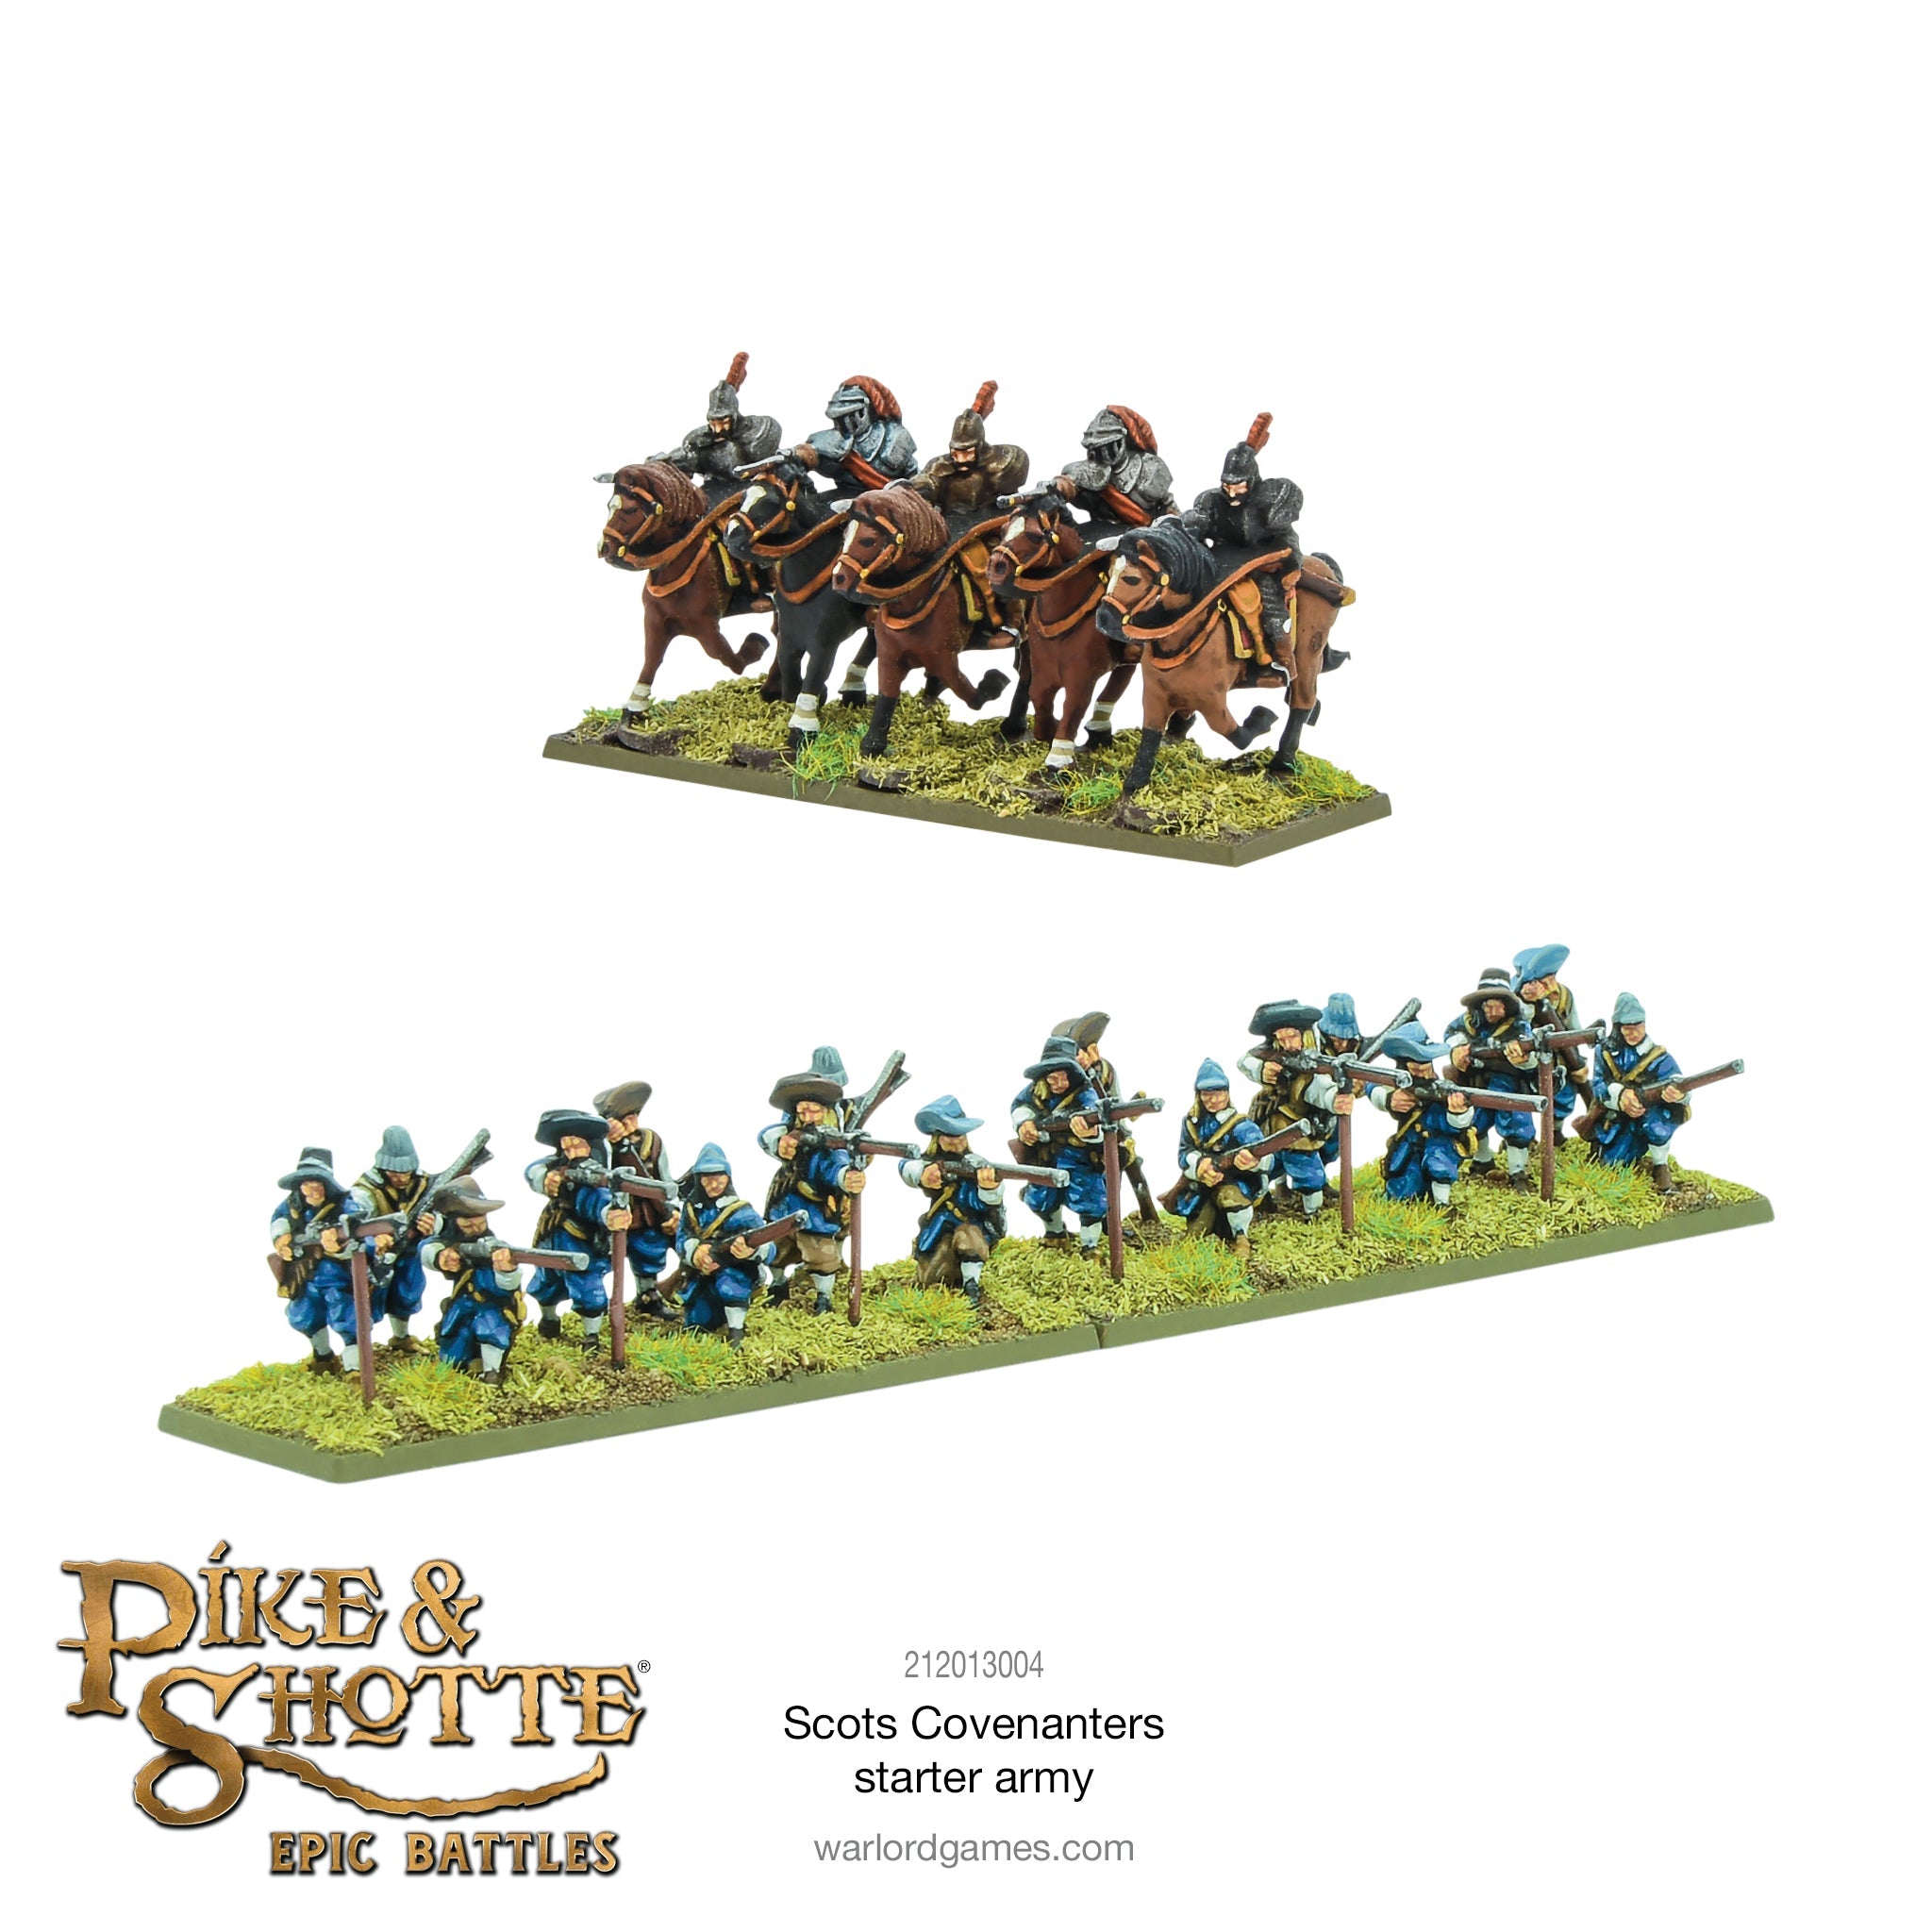 Pike & Shotte Epic Battles: Scots Covenanters starter army